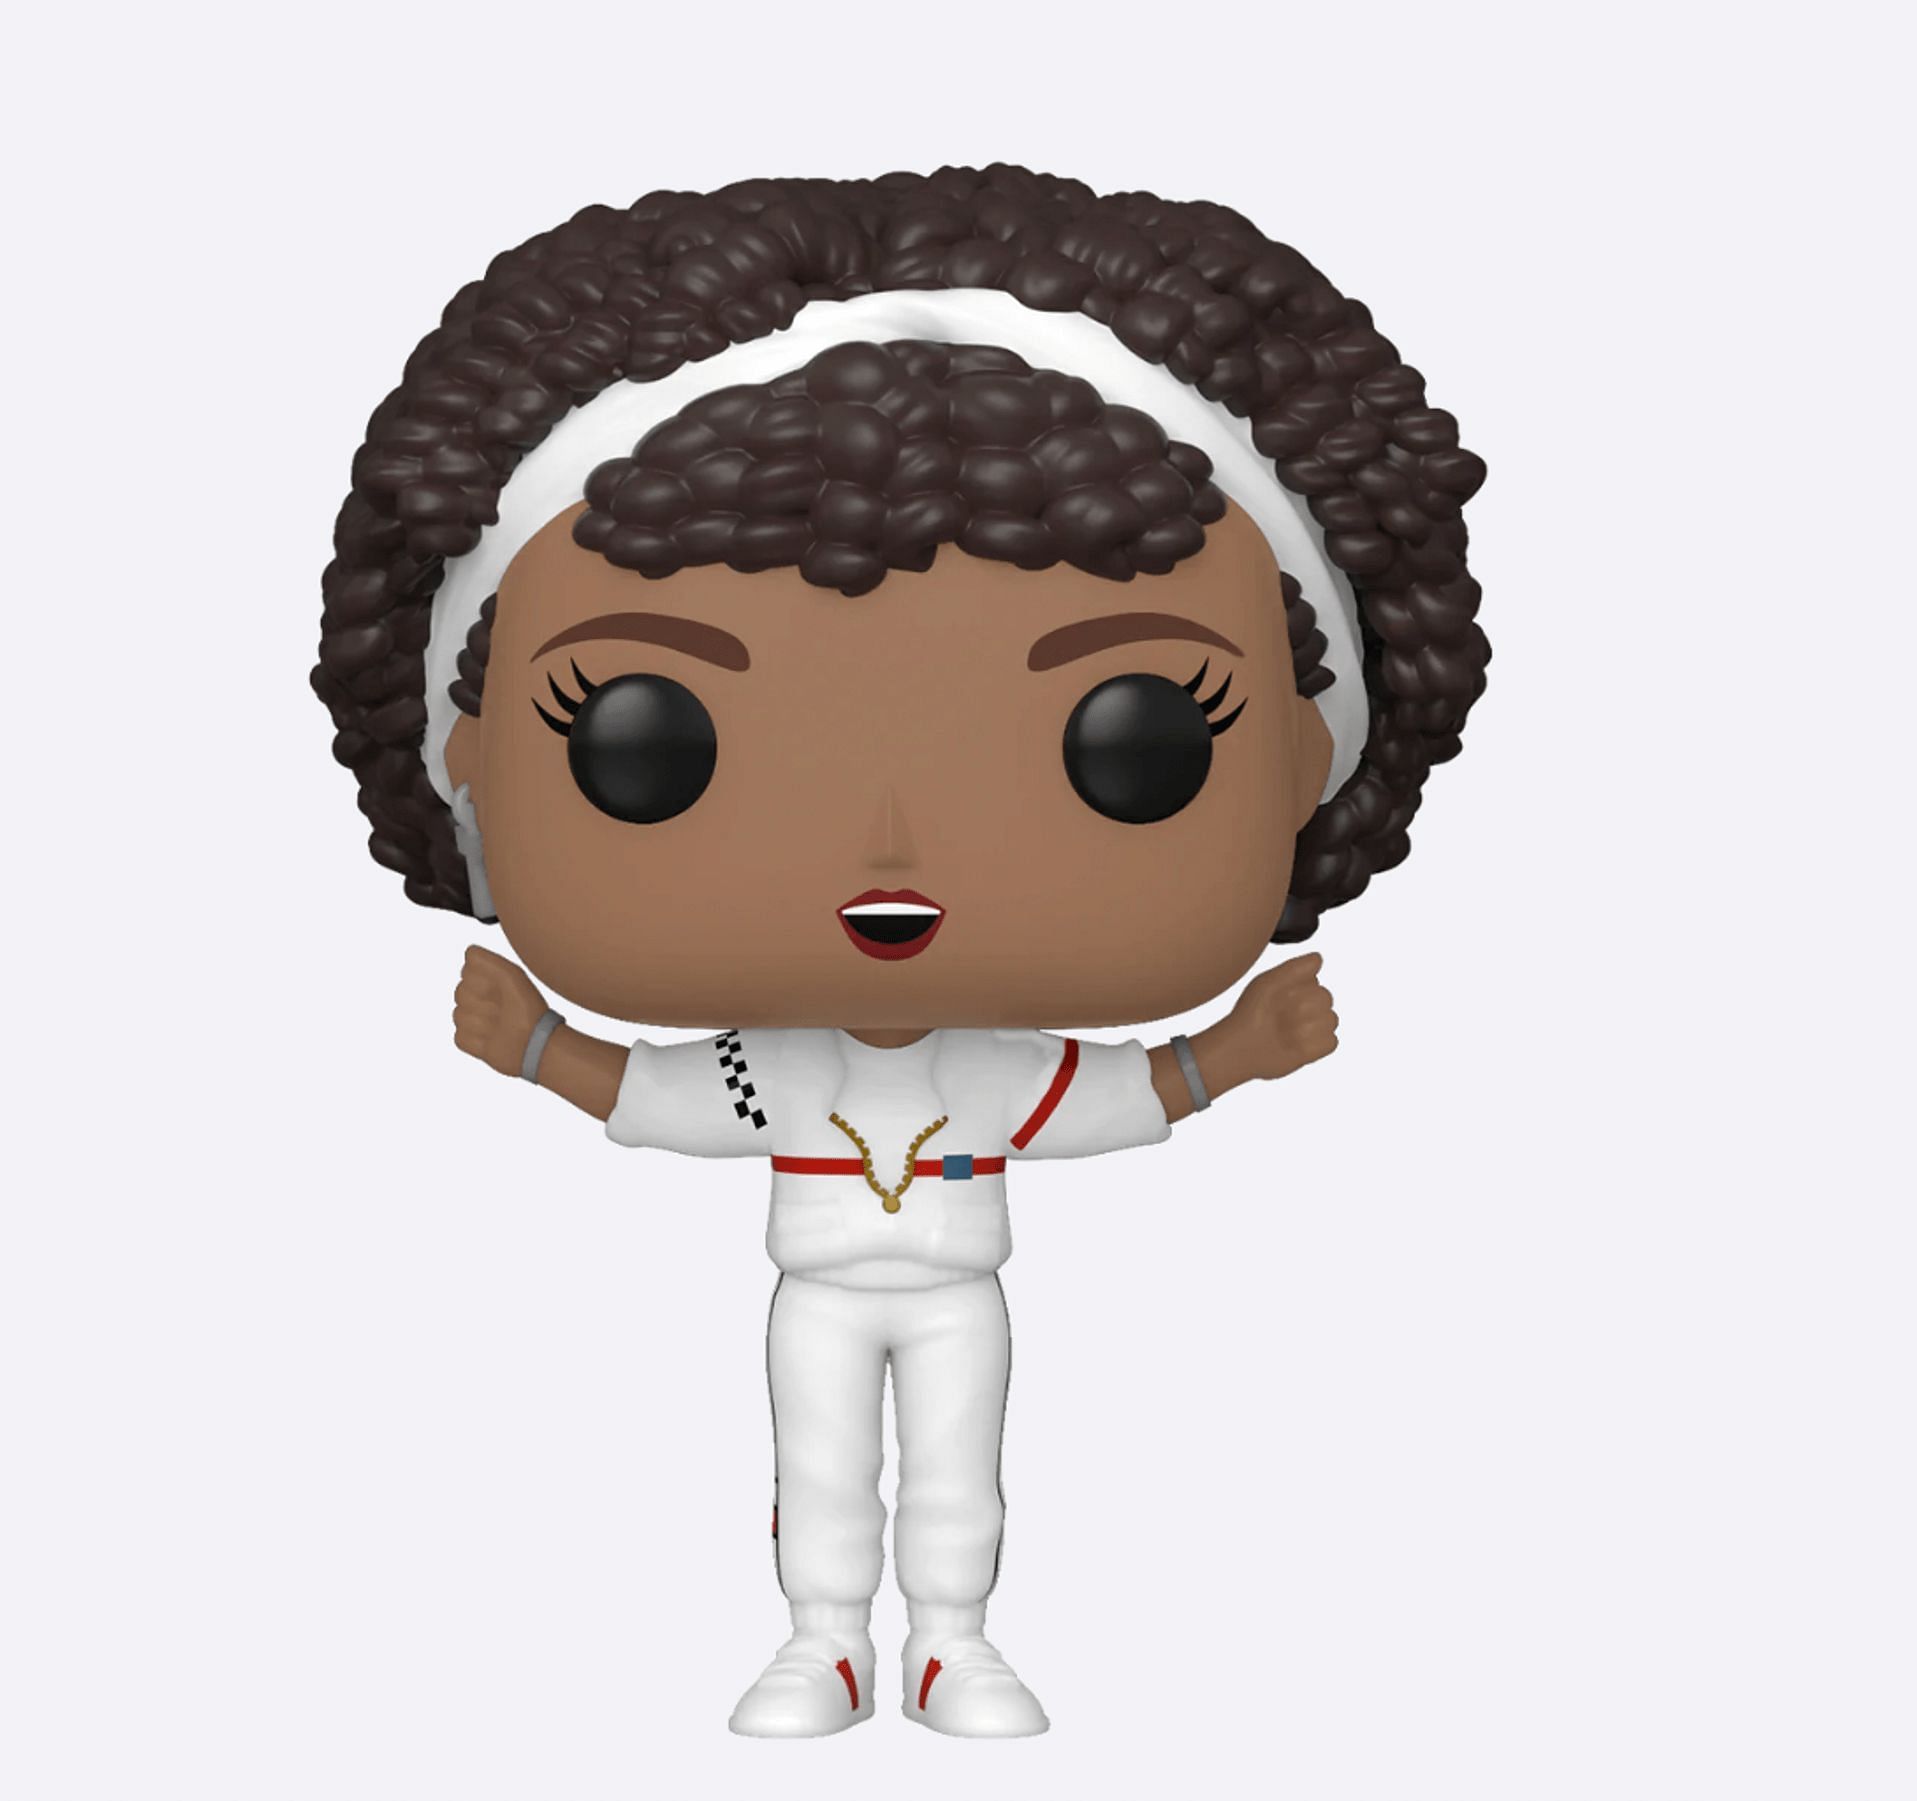 Funko Pop is the creator of many figurines of popular faces, one of them being Whitney Houston. (Image via Funko Pop)